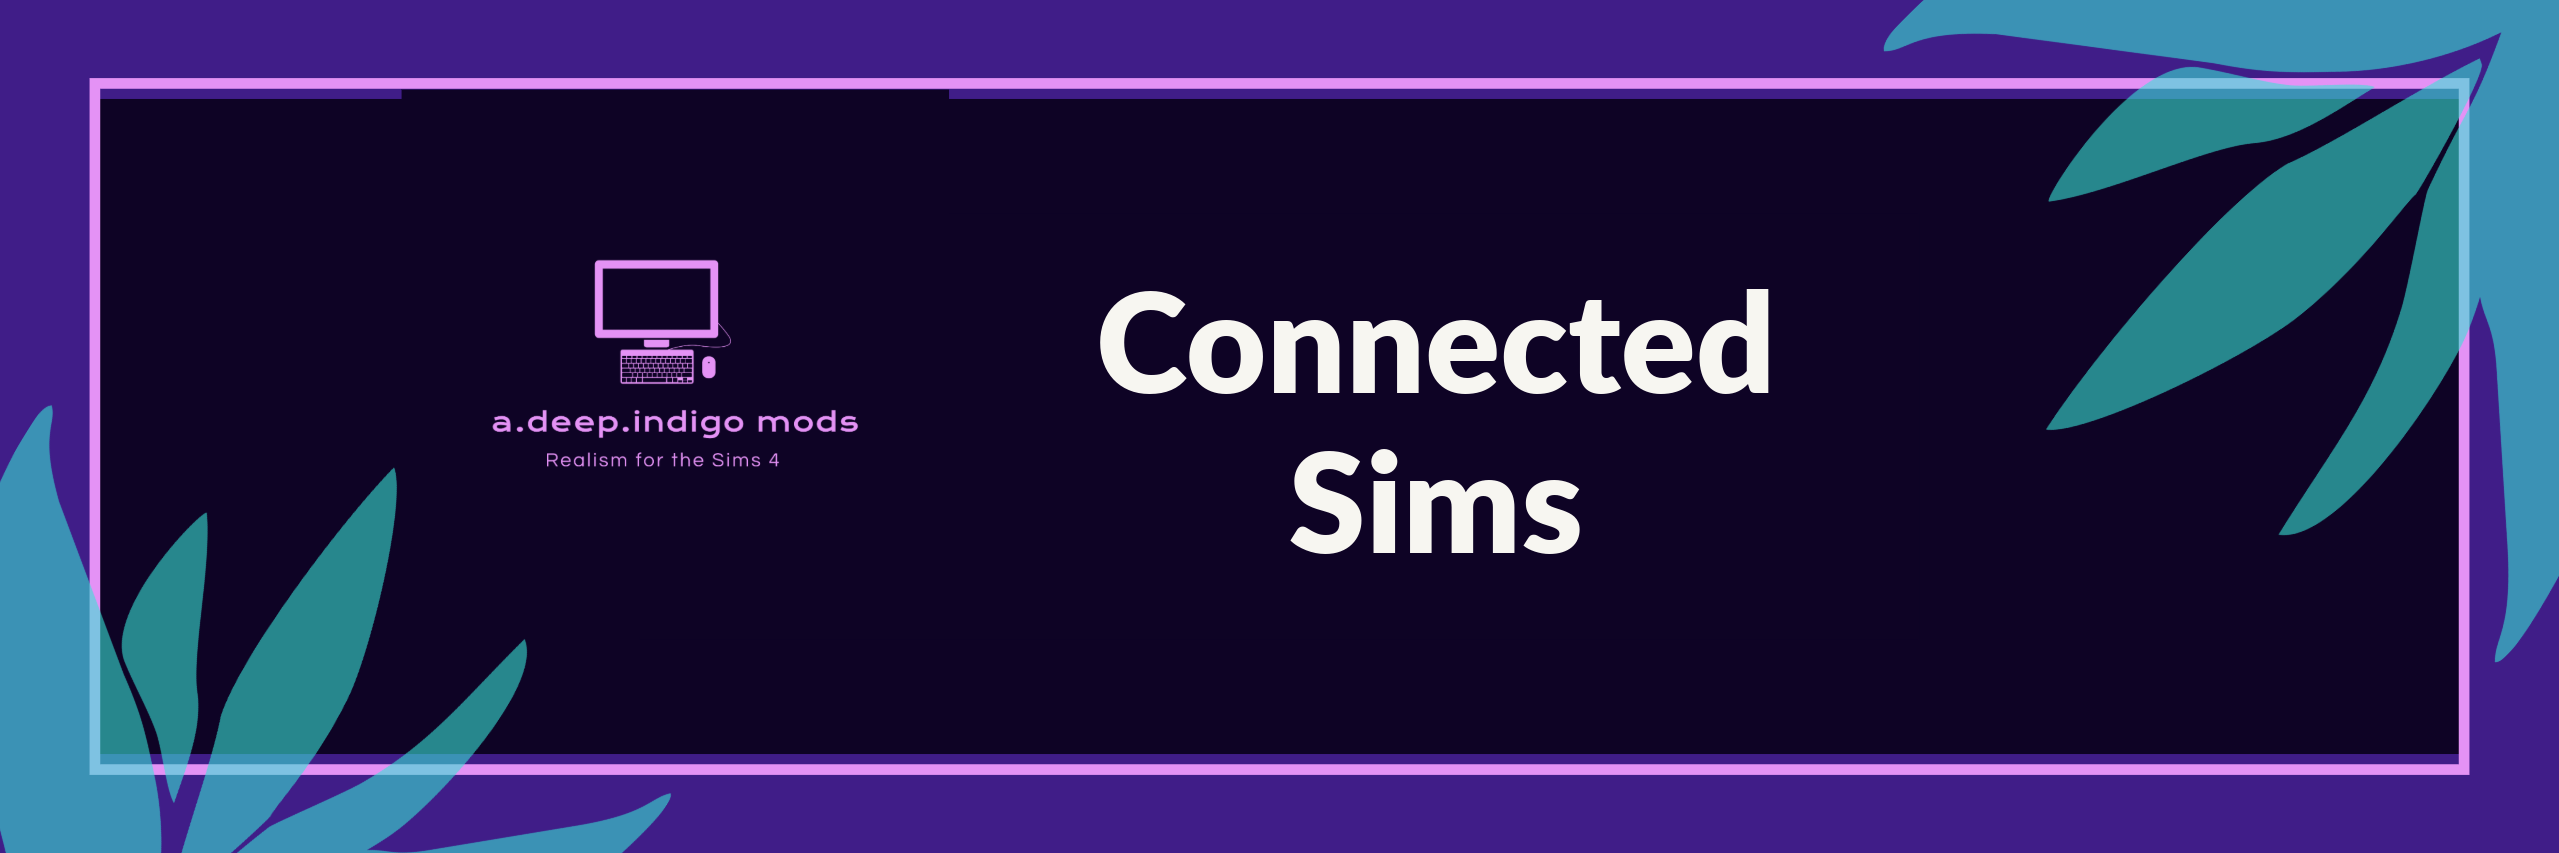 Connected Sims